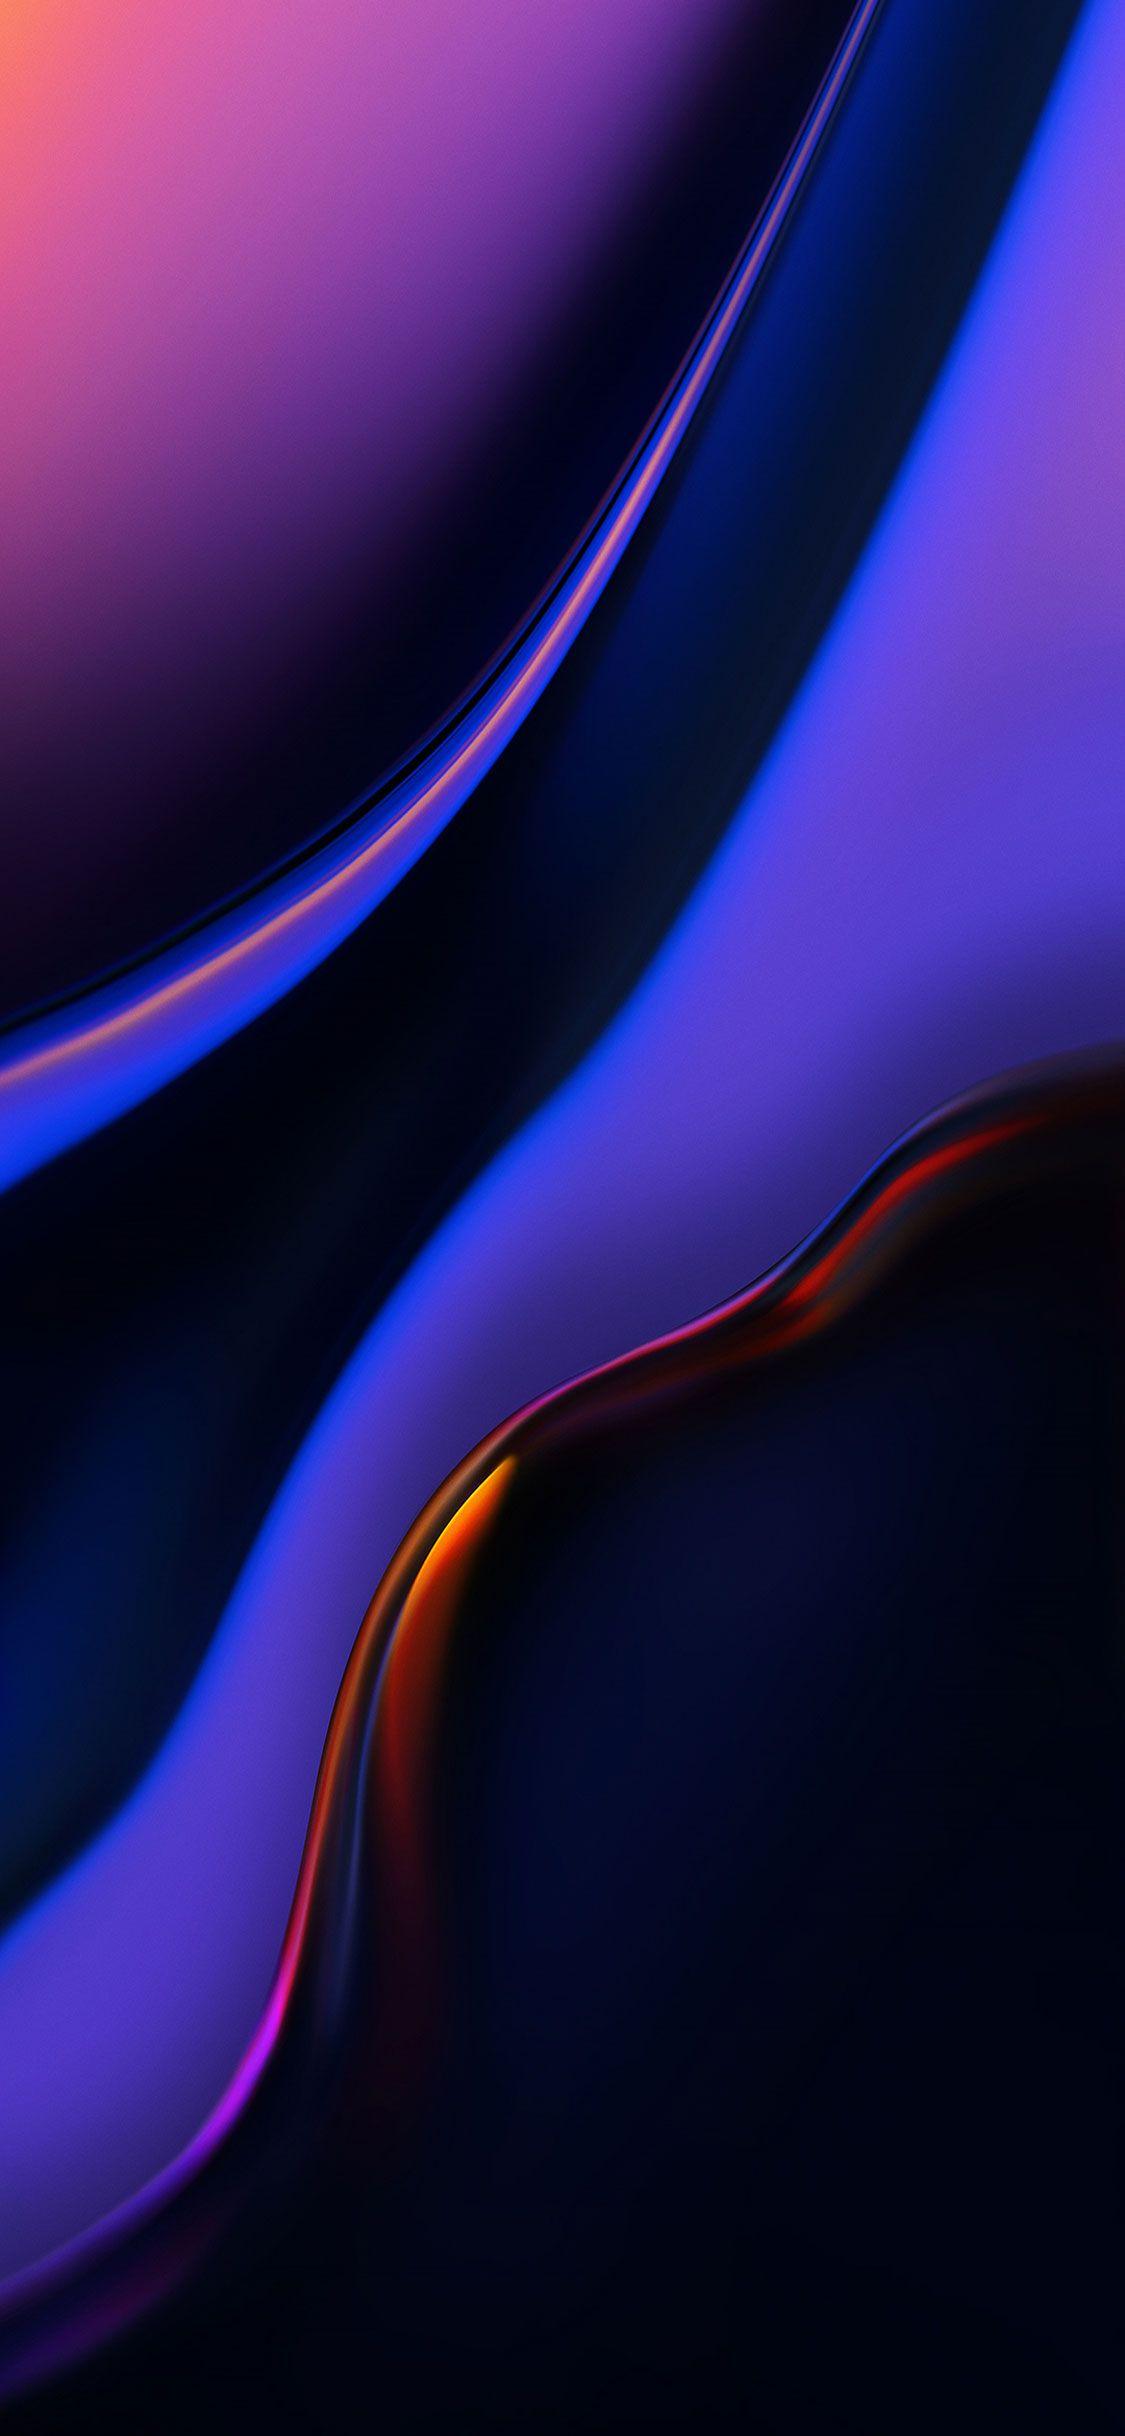 iPhone Wallpaper Free 2019 iPhone Background